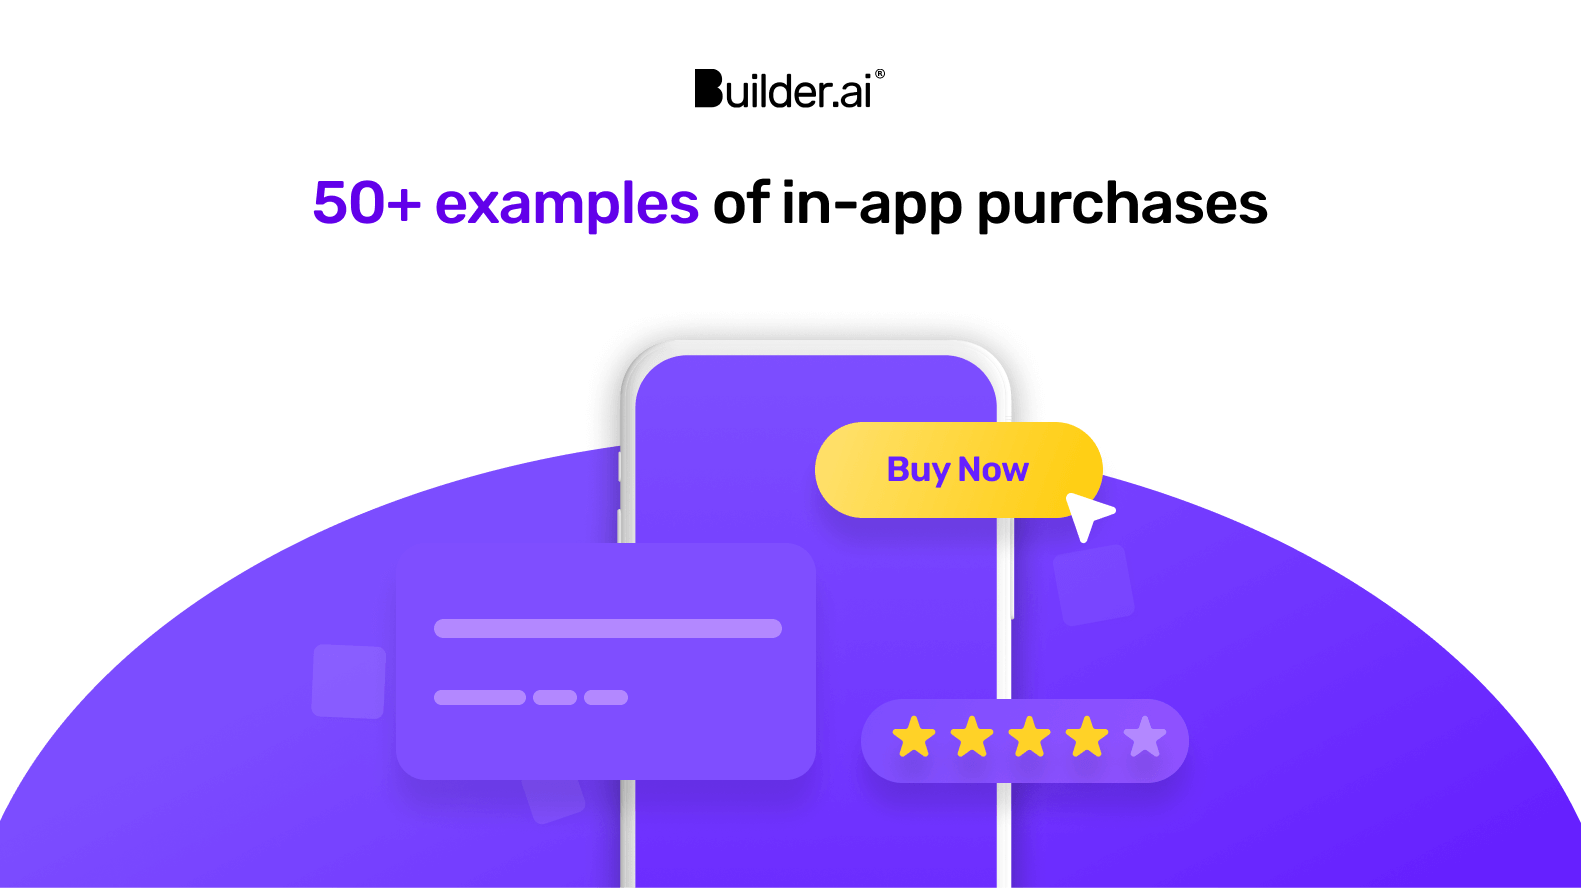 50+ revenue-boosting examples of in-app purchases (across industries)